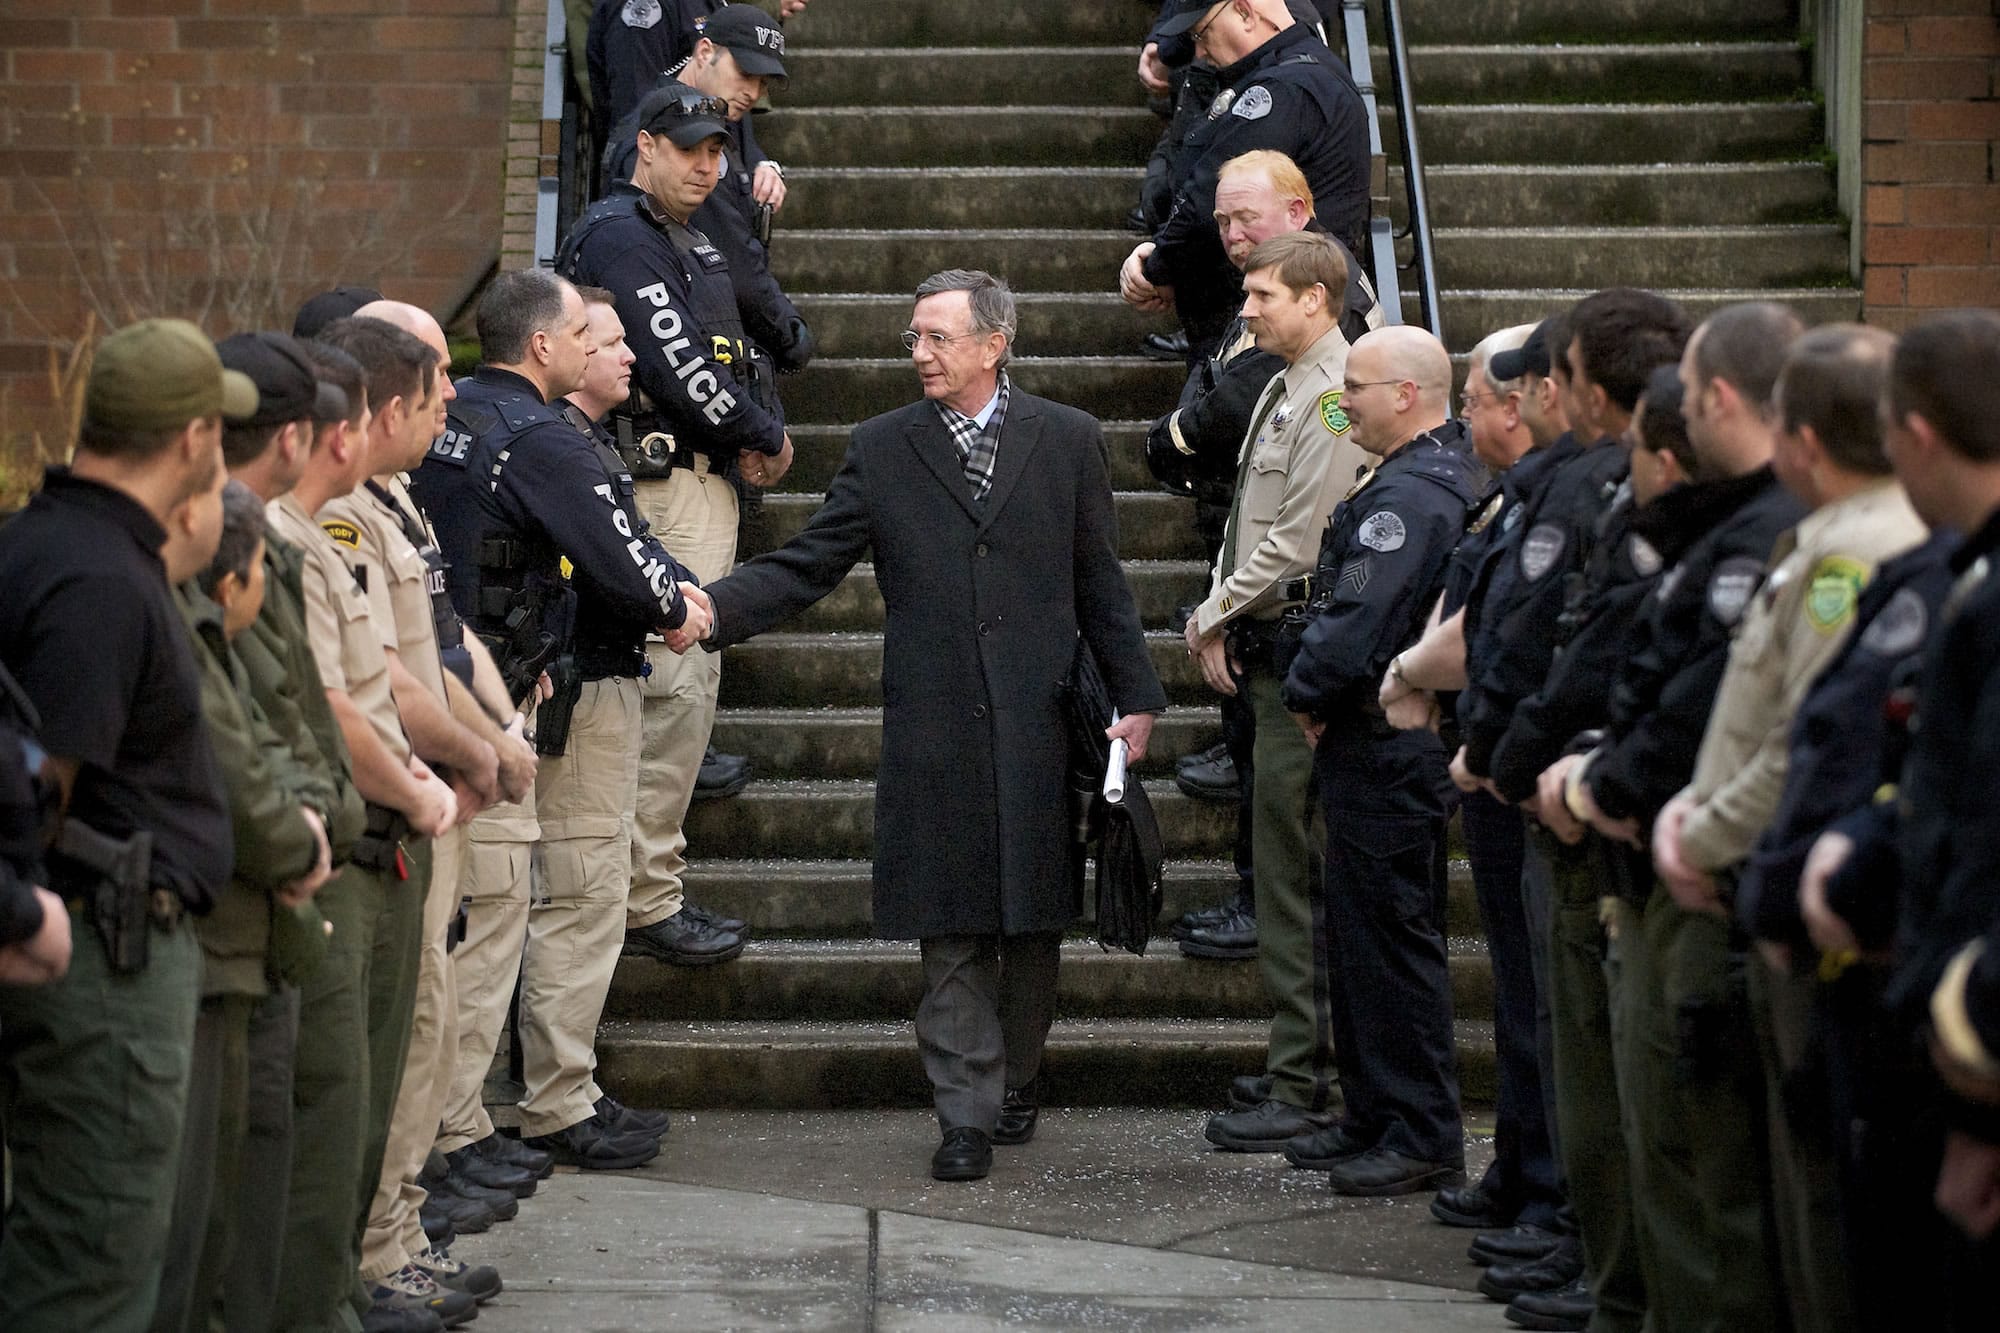 Officers from the Vancouver Police Department and Clark County Sheriff's Office line the stairs and walkway outside the Clark County Courthouse Friday afternoon to give Judge John Wulle a surprise send-off on his last day presiding as judge.